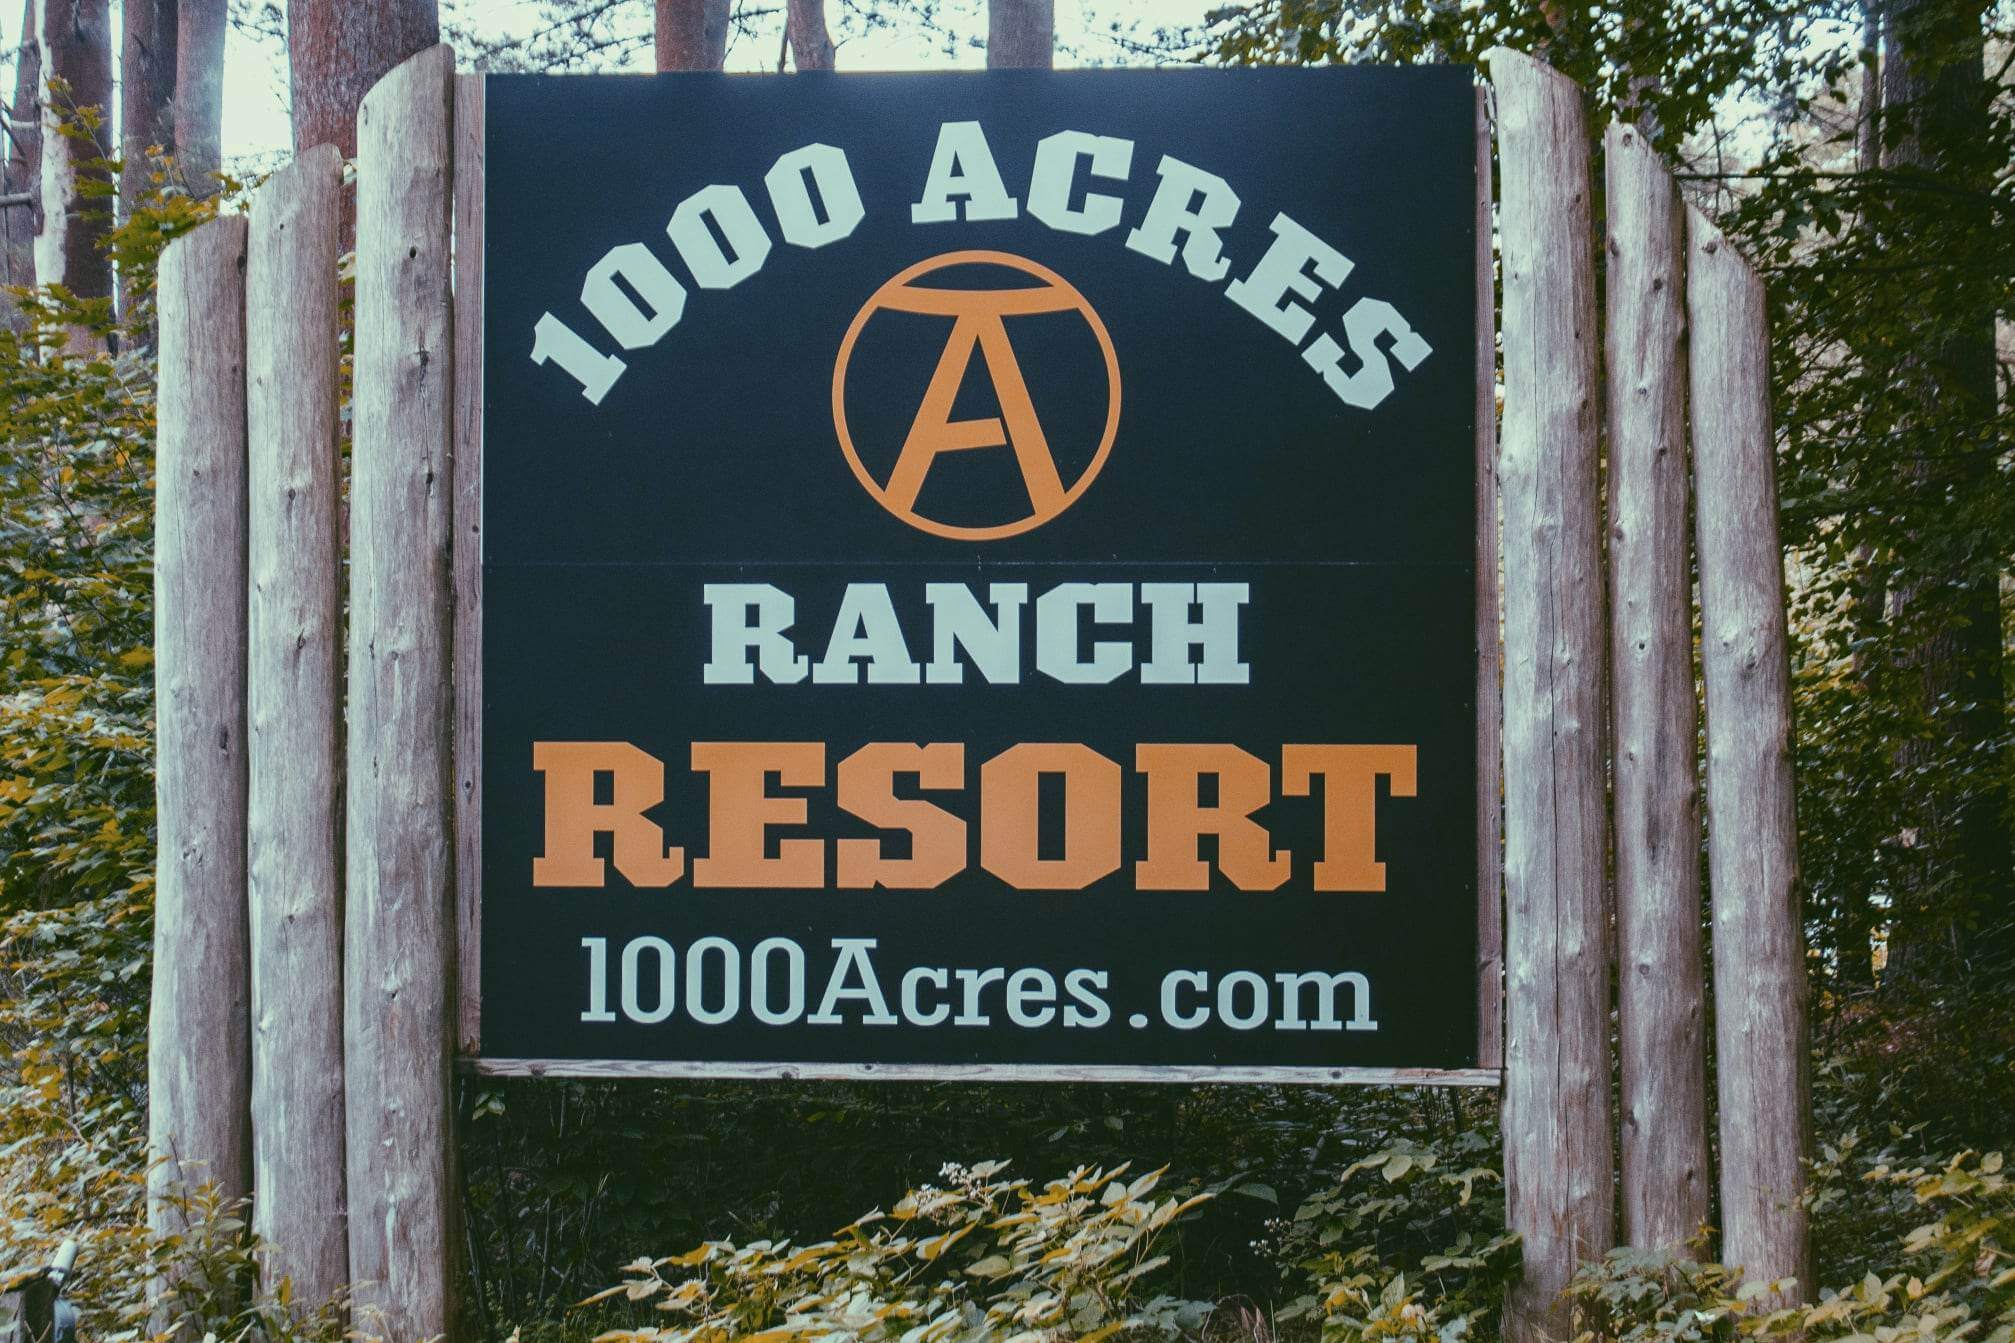 1000 Acres Ranch Resort Offers Day Passes, Under New Management